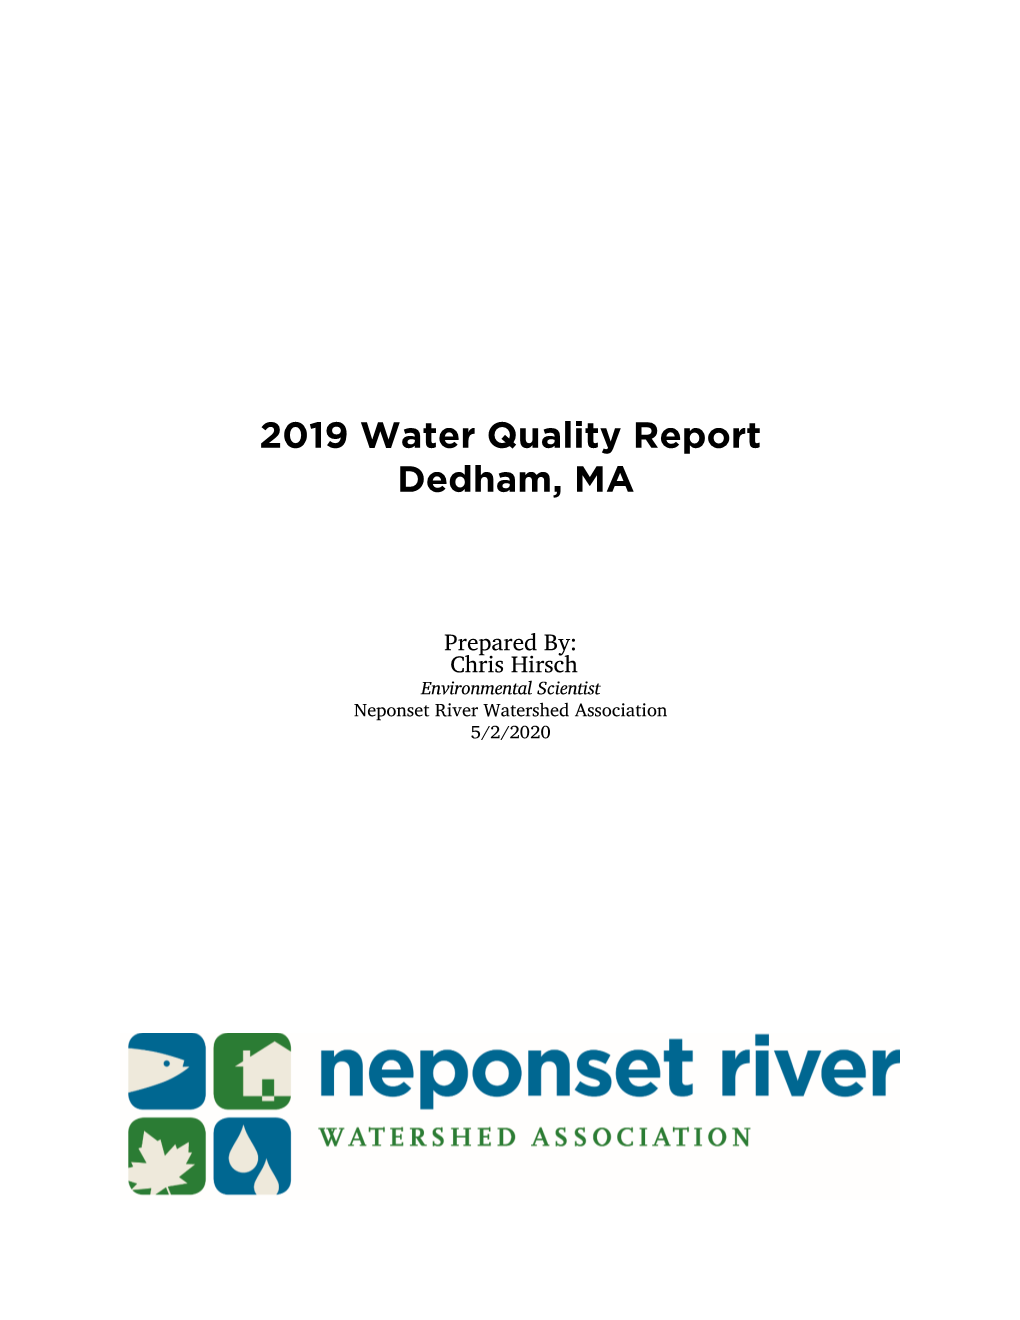 2019 Water Quality Report Dedham, MA